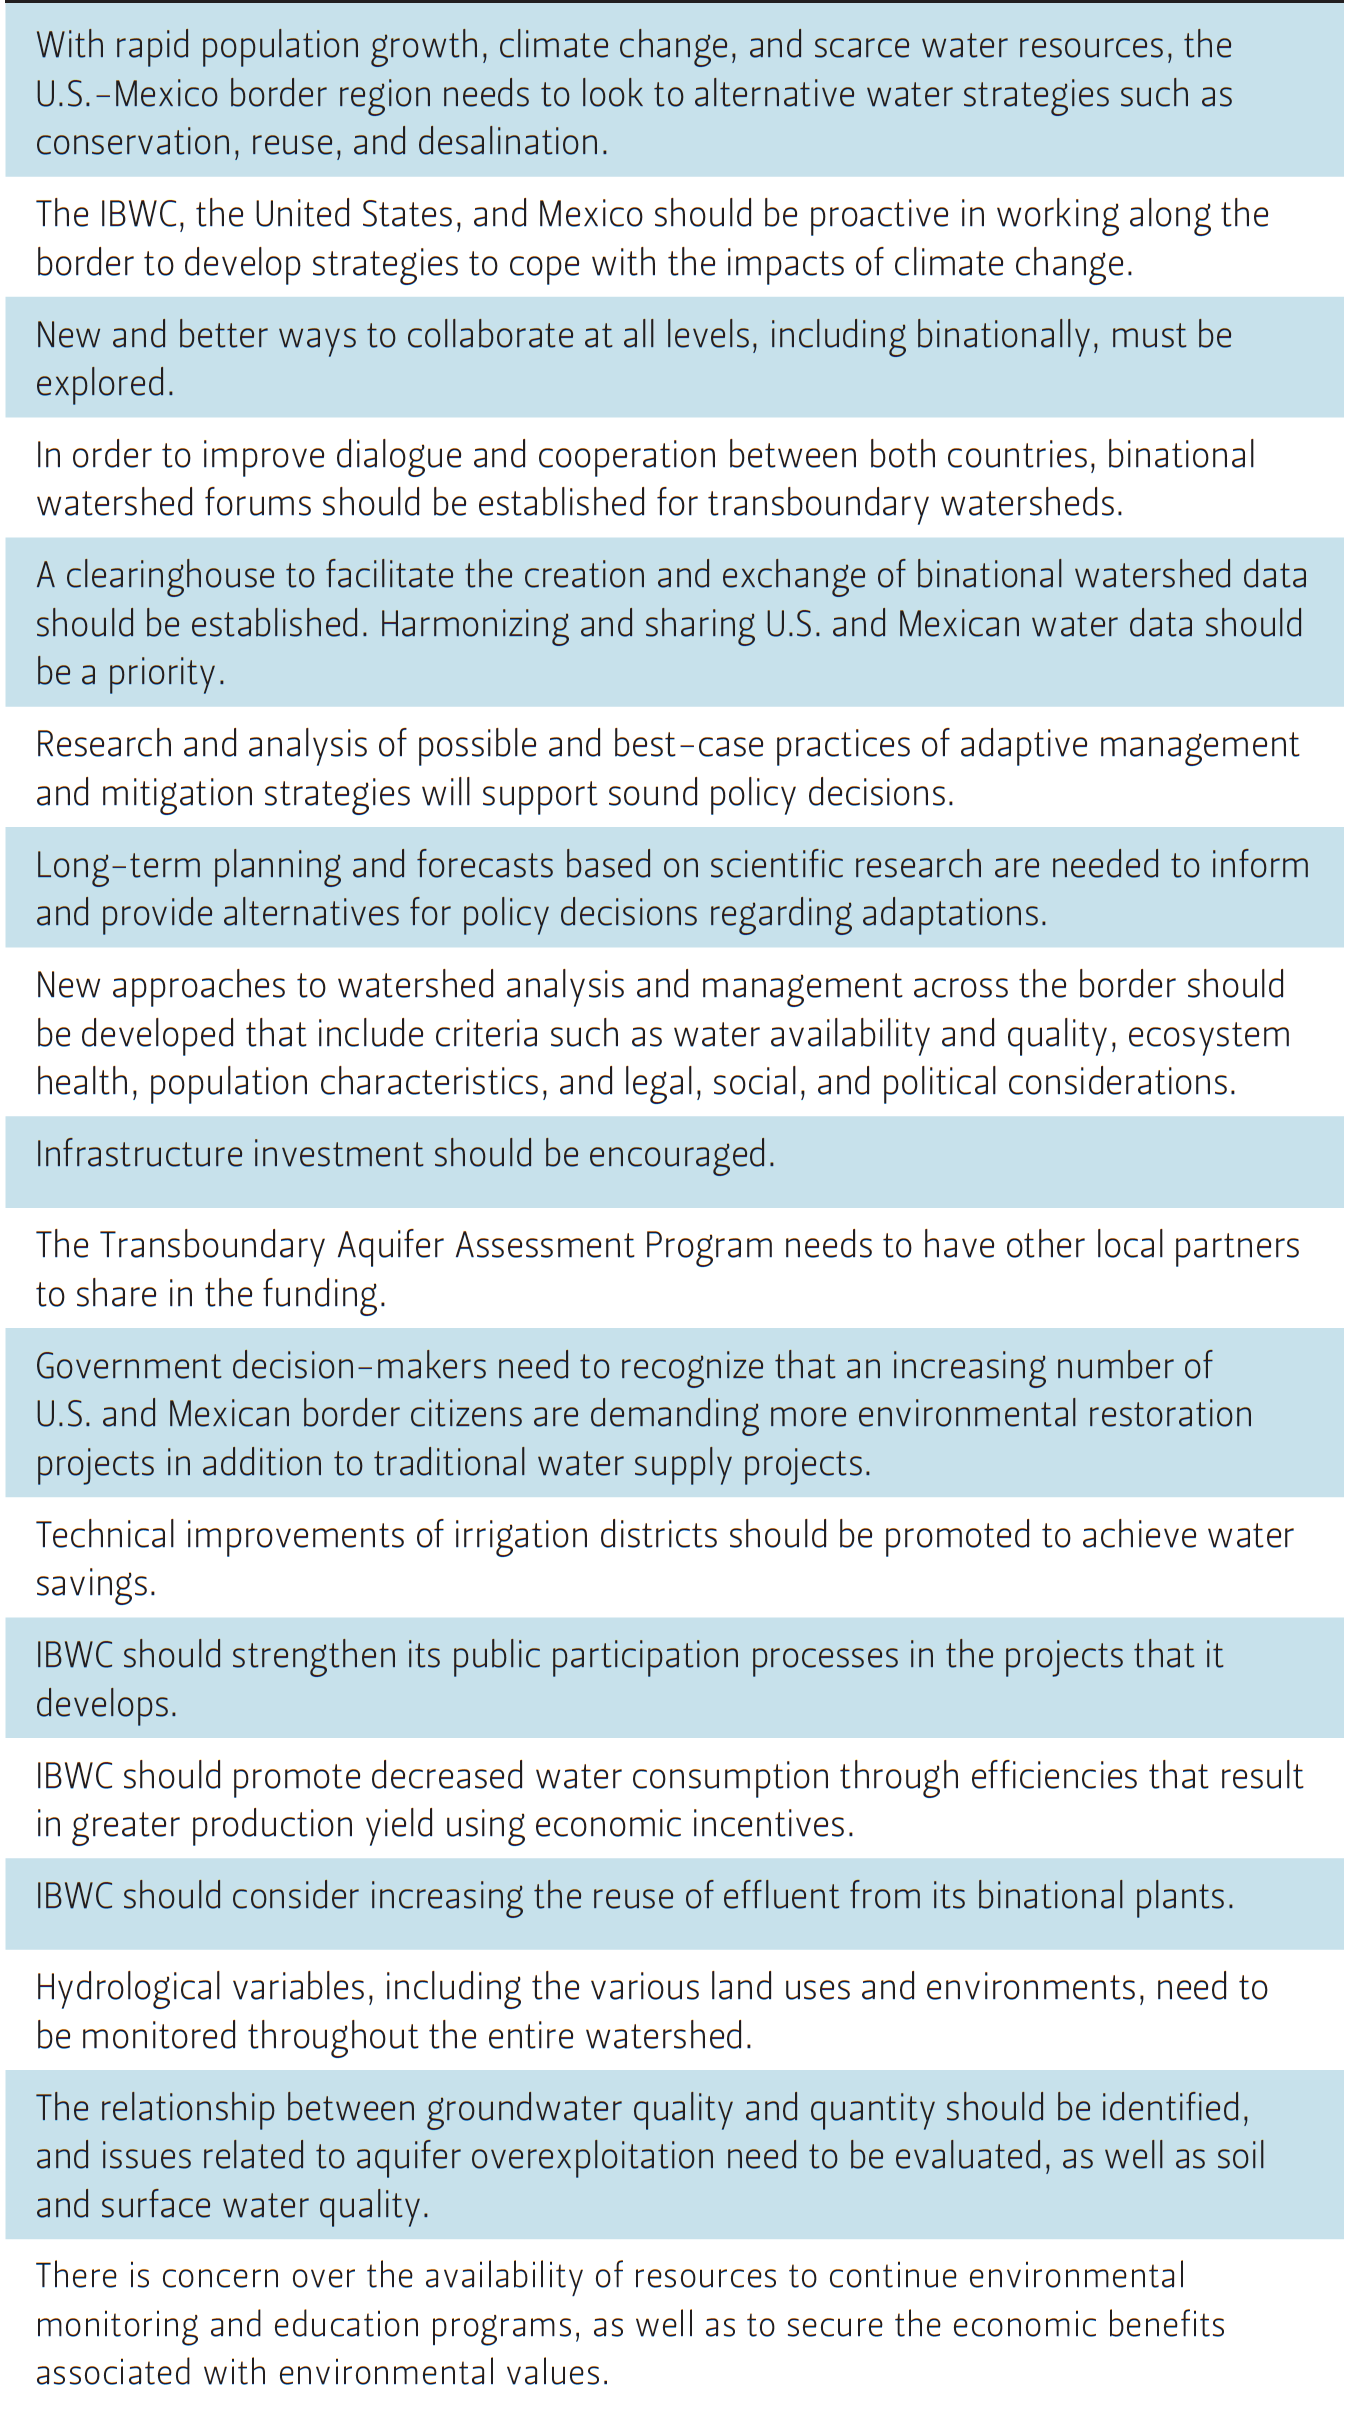 TABLE 2 — THE 2012 IBWC BORDER WATER RESOURCES SUMMIT: SELECT RECOMMENDATIONS FROM FOUR WORKGROUPS